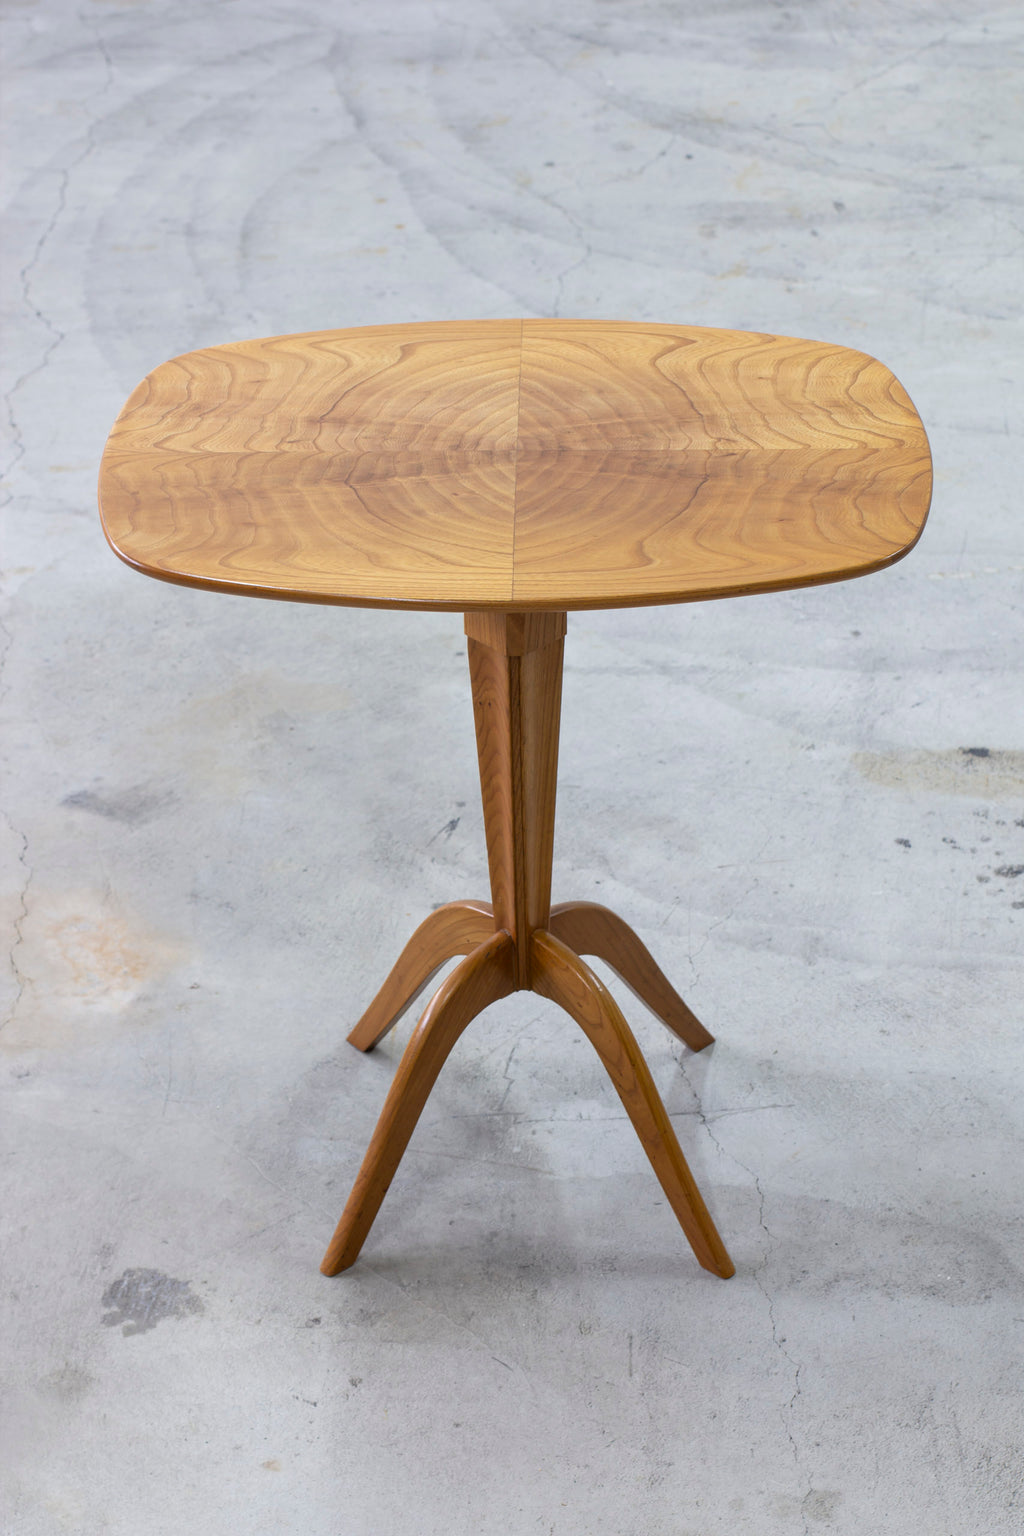 Swedish modern side table in the manner of Oscar Nilsson